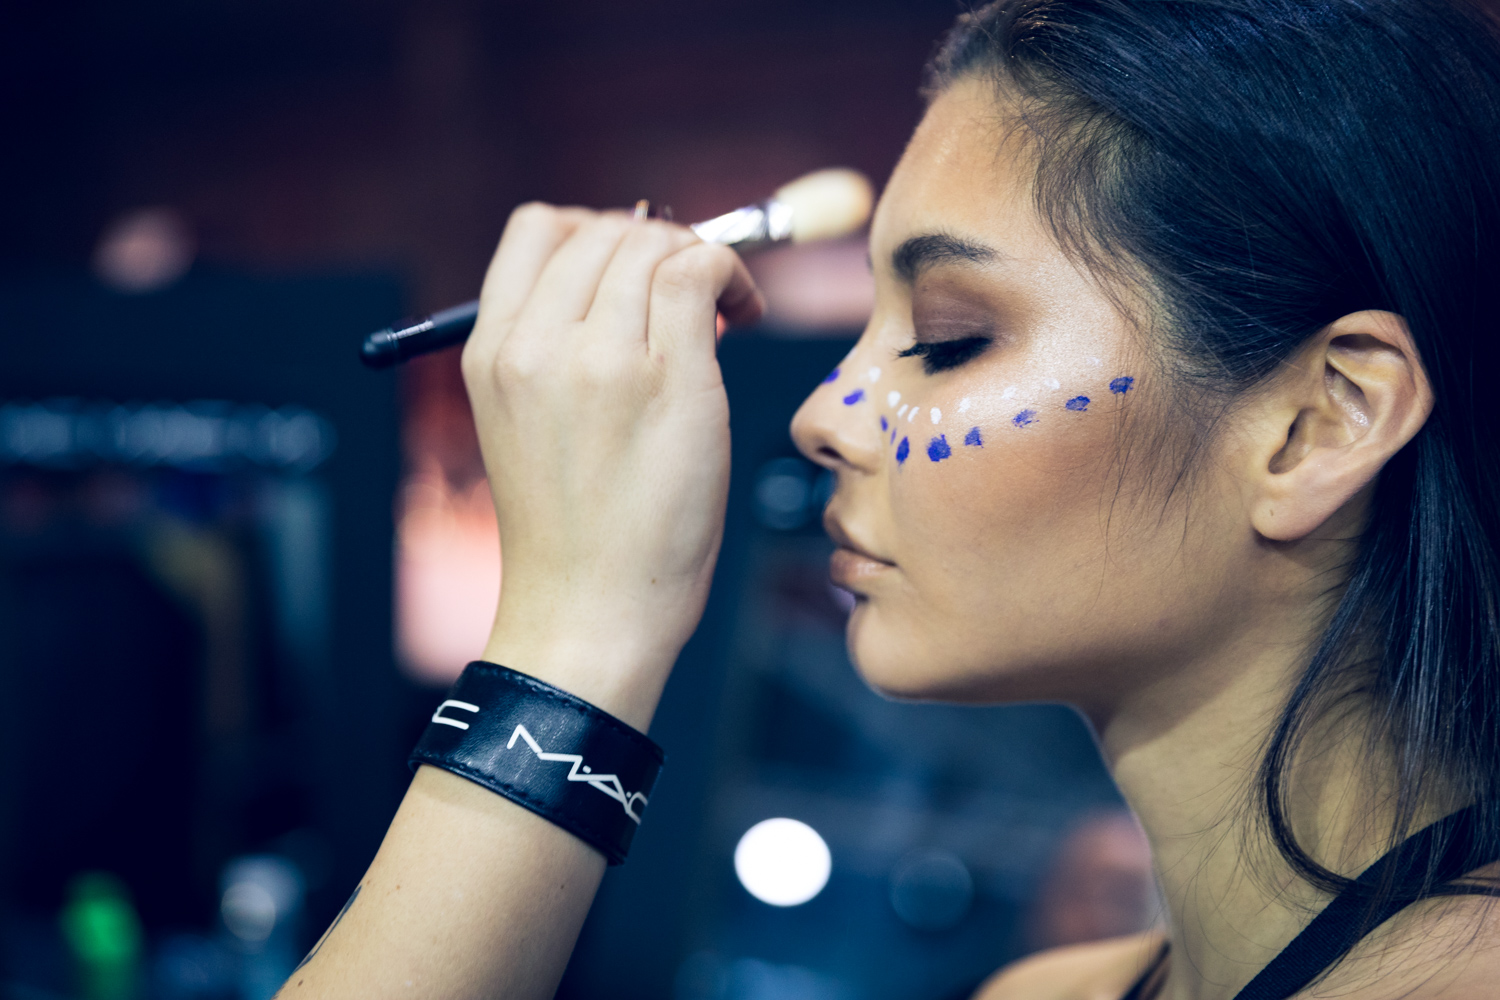 #AFICTFW18 | ALL the Backstage Beauty Moments You Missed